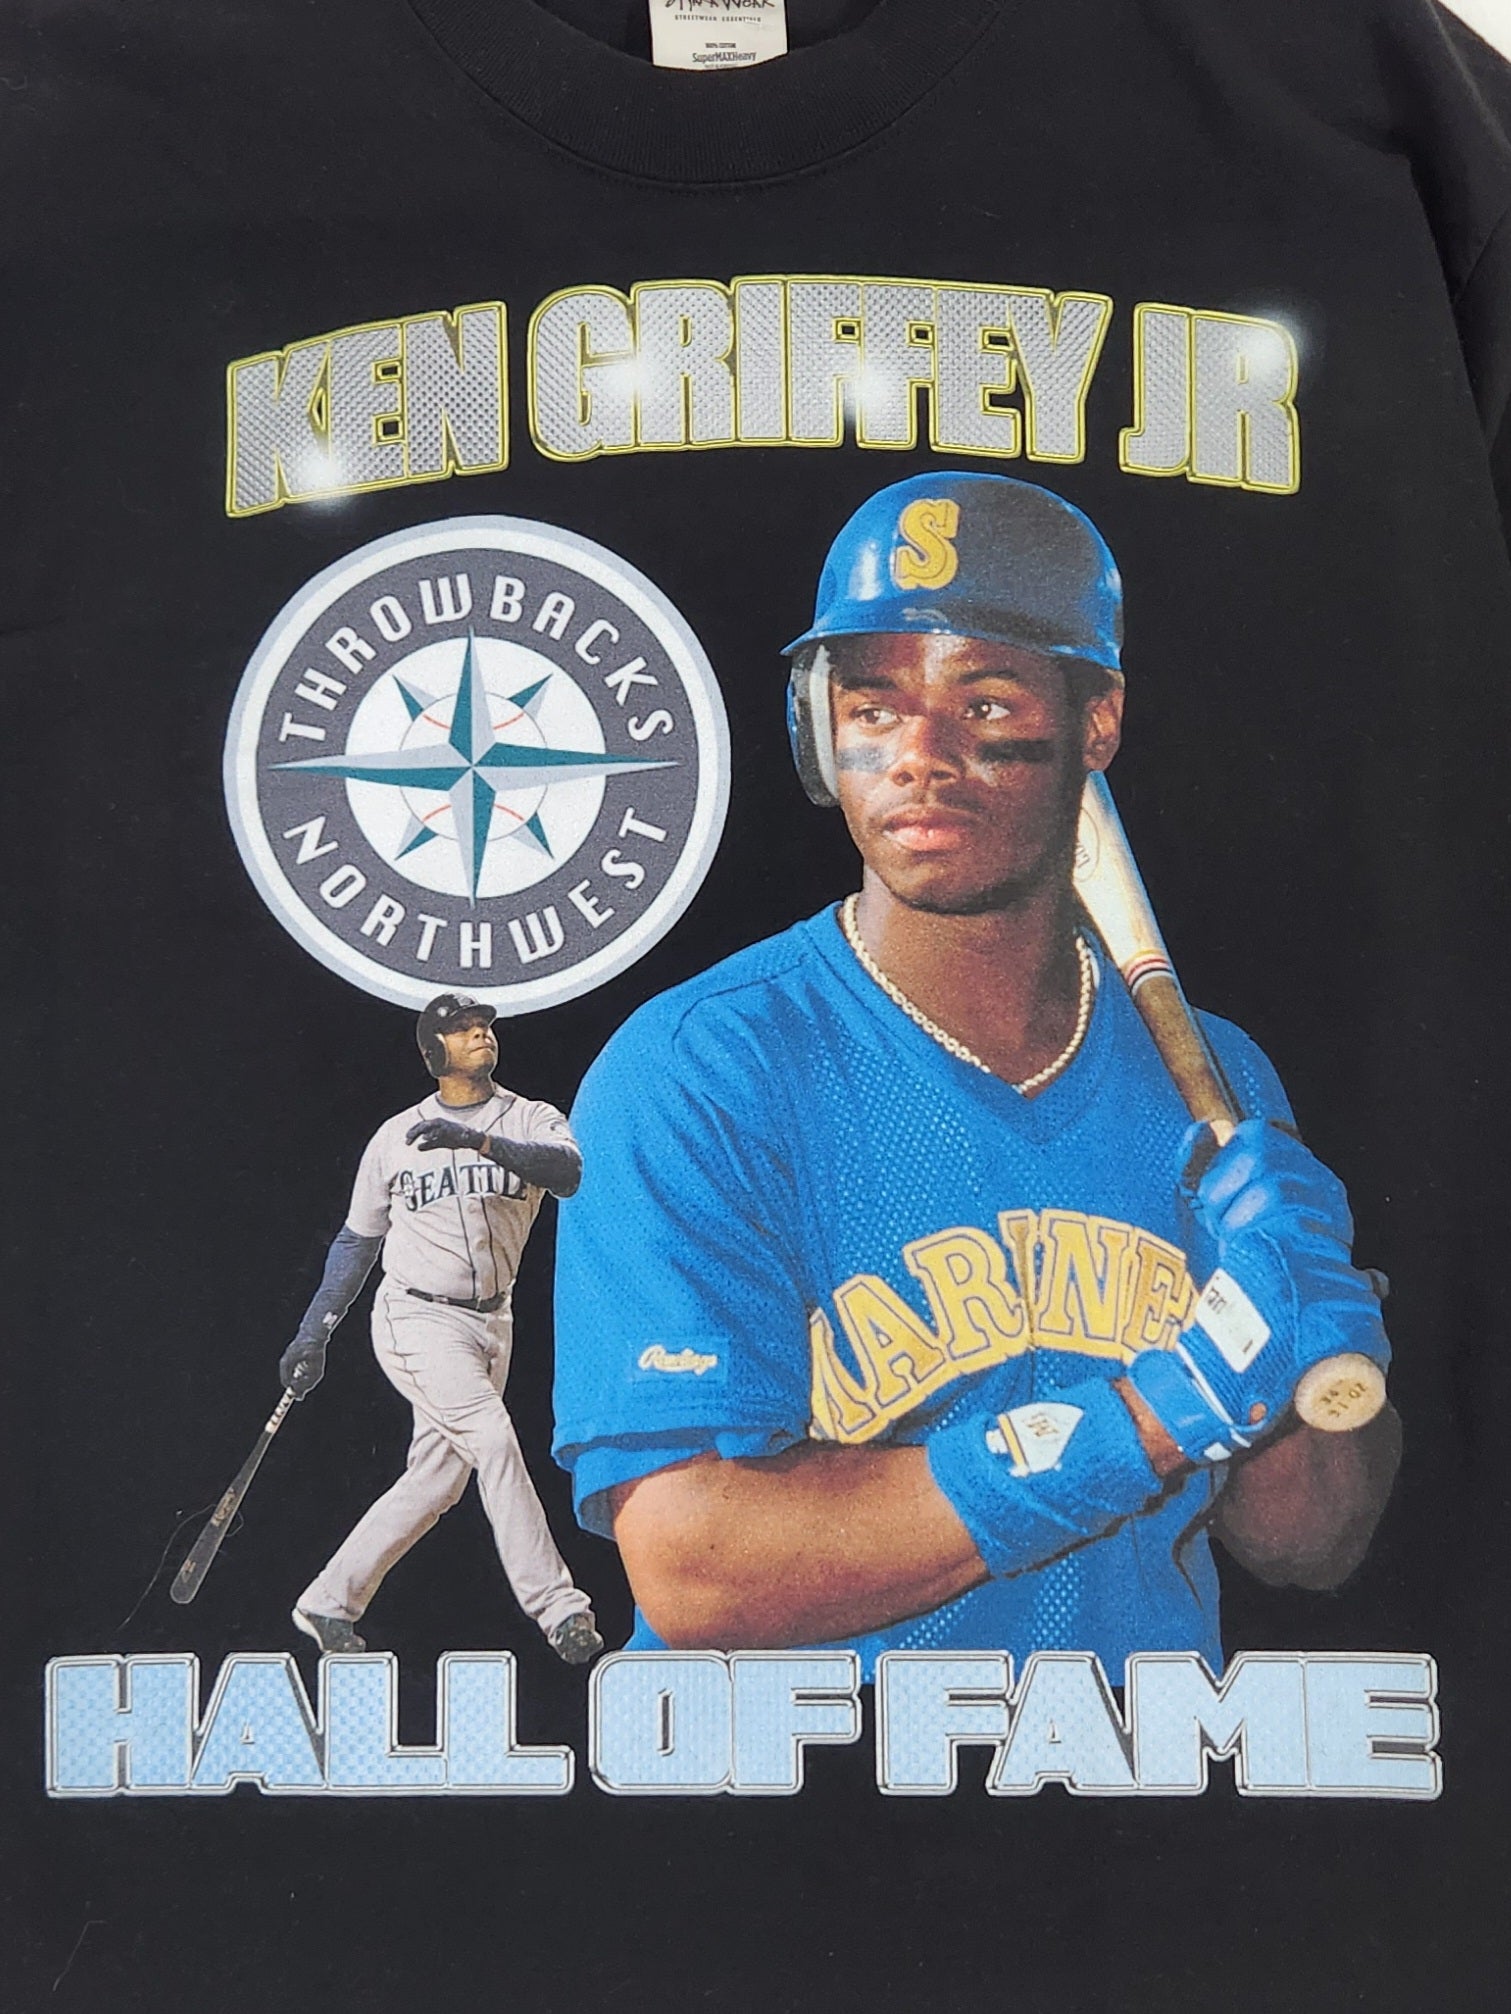 griffey hall of fame jersey